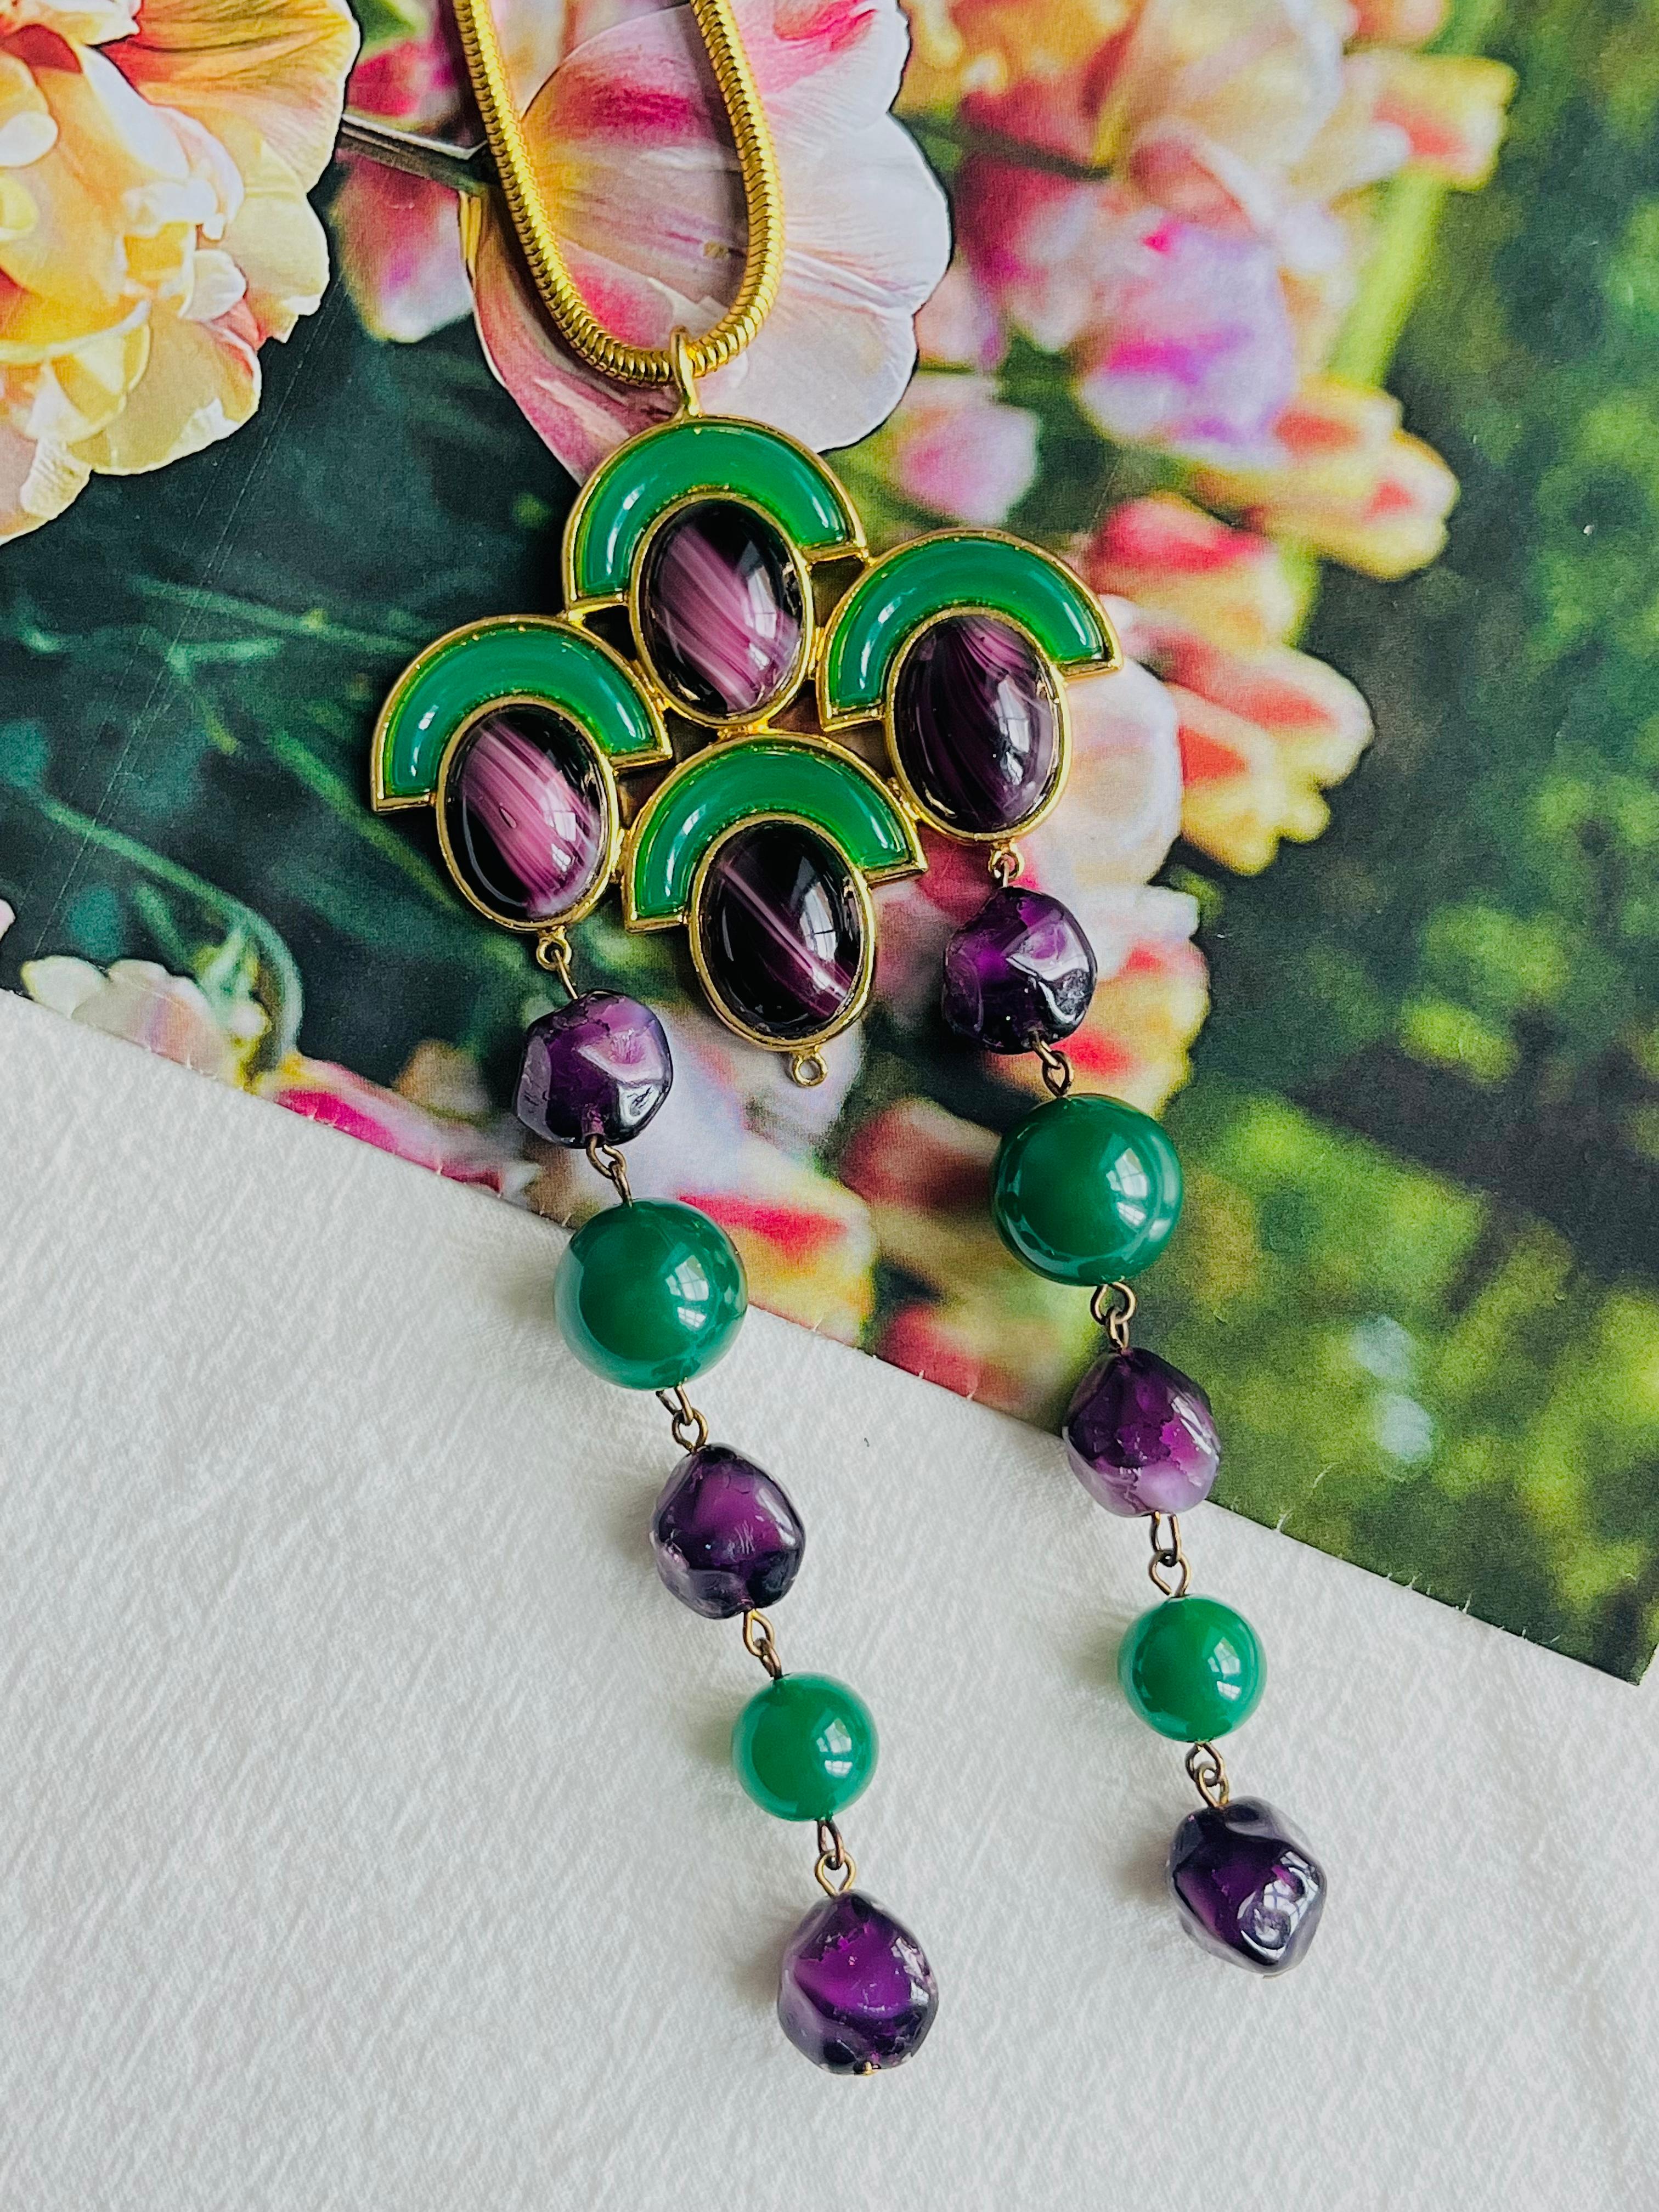 Christian Dior Vintage 1971 Emerald Amethyst Cabochon Fans Tassel Long Snake Necklace, Gold Plated

Very excellent condition. 100% Genuine. It seems the middle row has been lost, you can also add or take off other rows to make different style